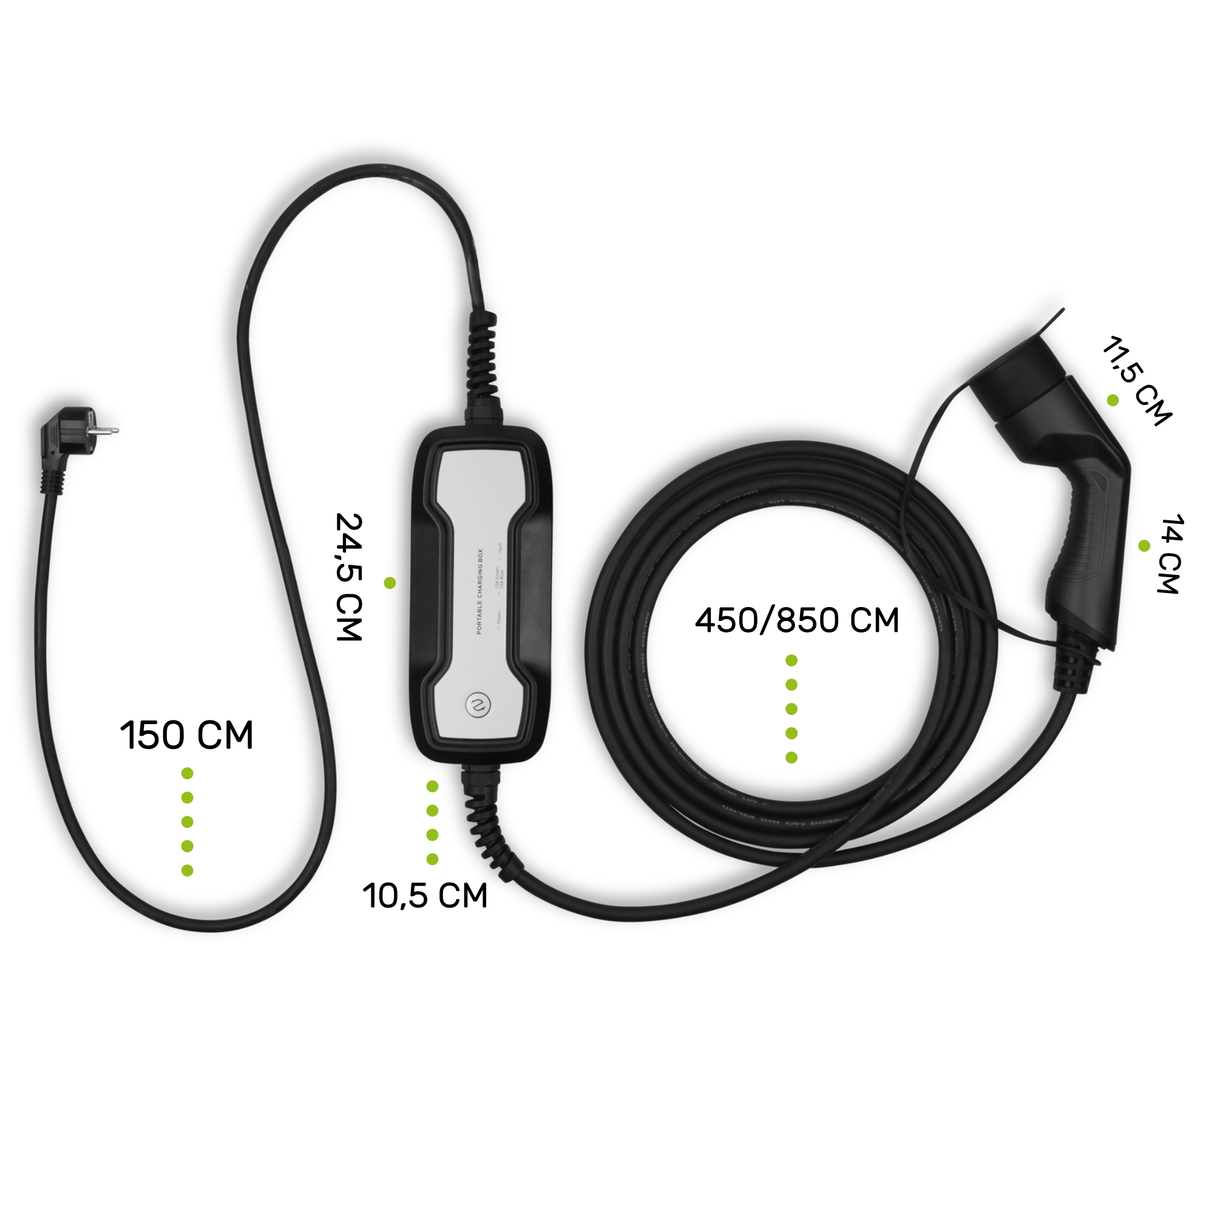 Charger mobile Smart Eq Forfour - Besen - Type 2 à Schuko